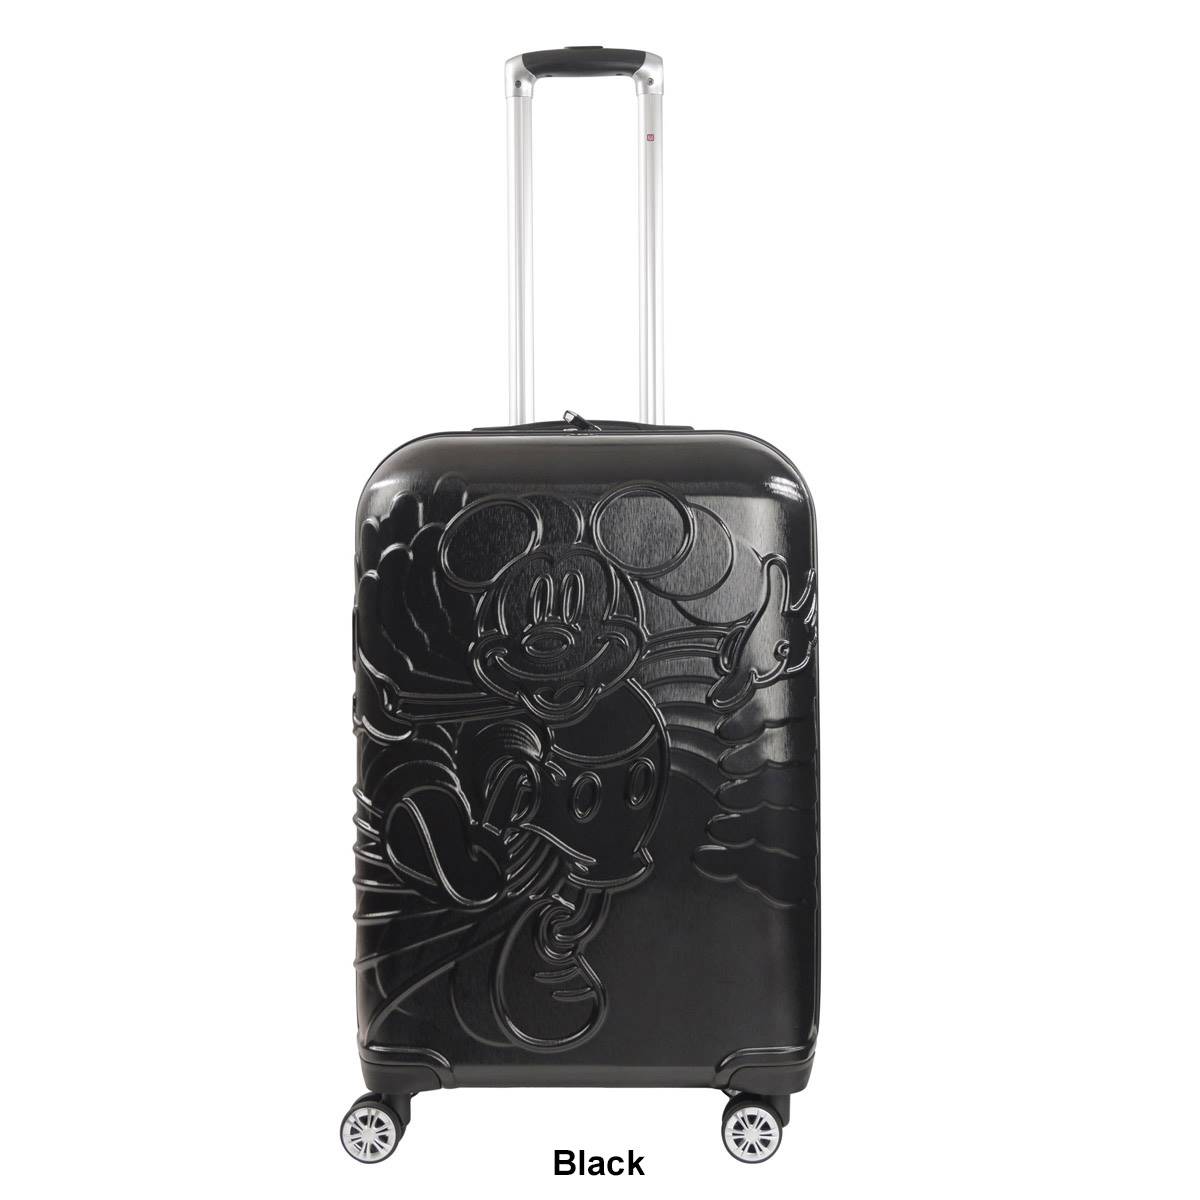 FUL 25in. Running Mickey Mouse Hardside Luggage